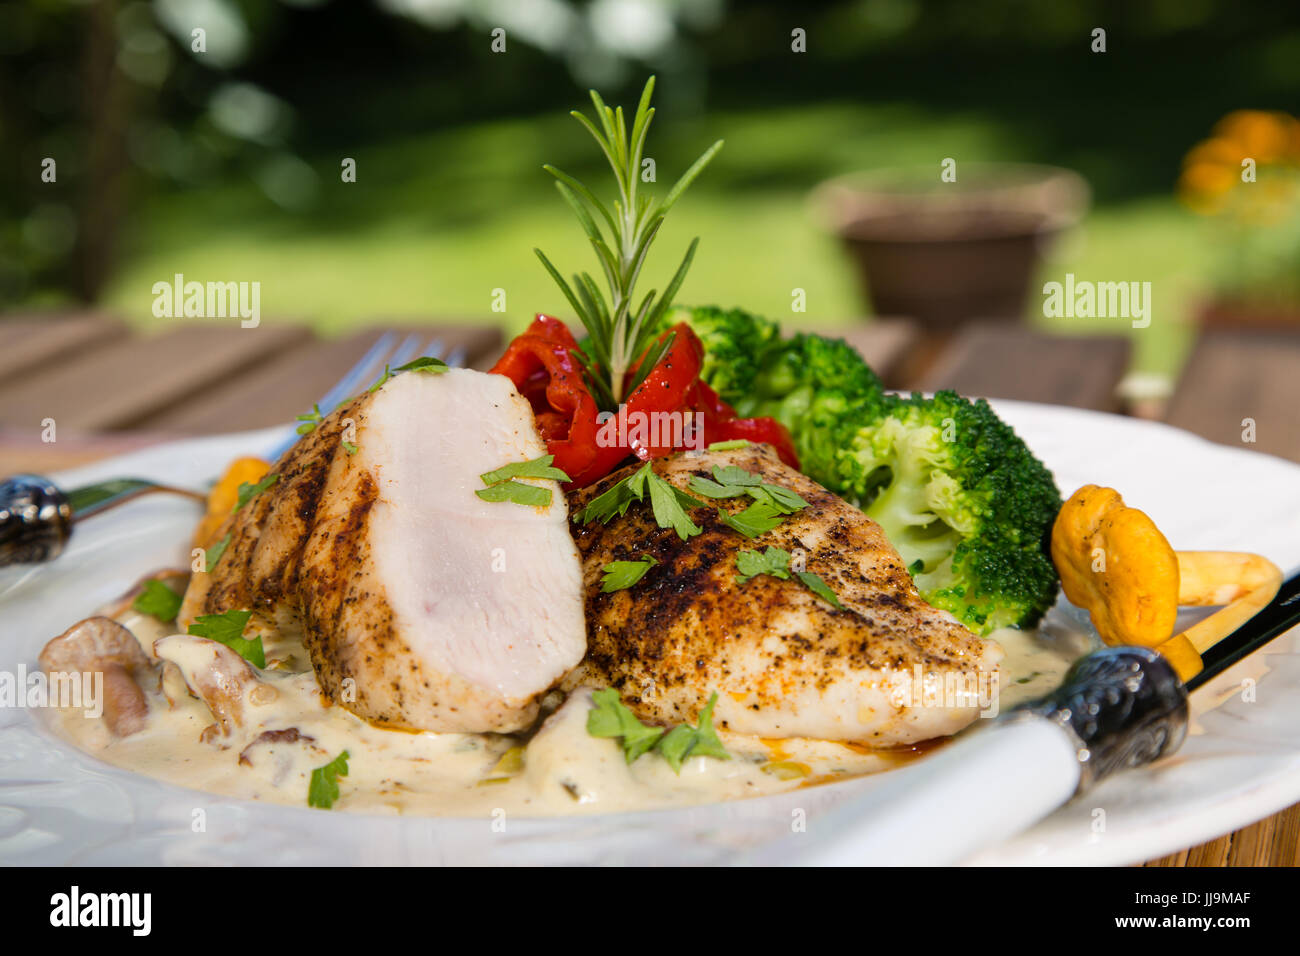 Grilled chicken, cream sauce with mushrooms chanterelles, broccoli and roasted red peppers. Healthy balanced food concept. Stock Photo